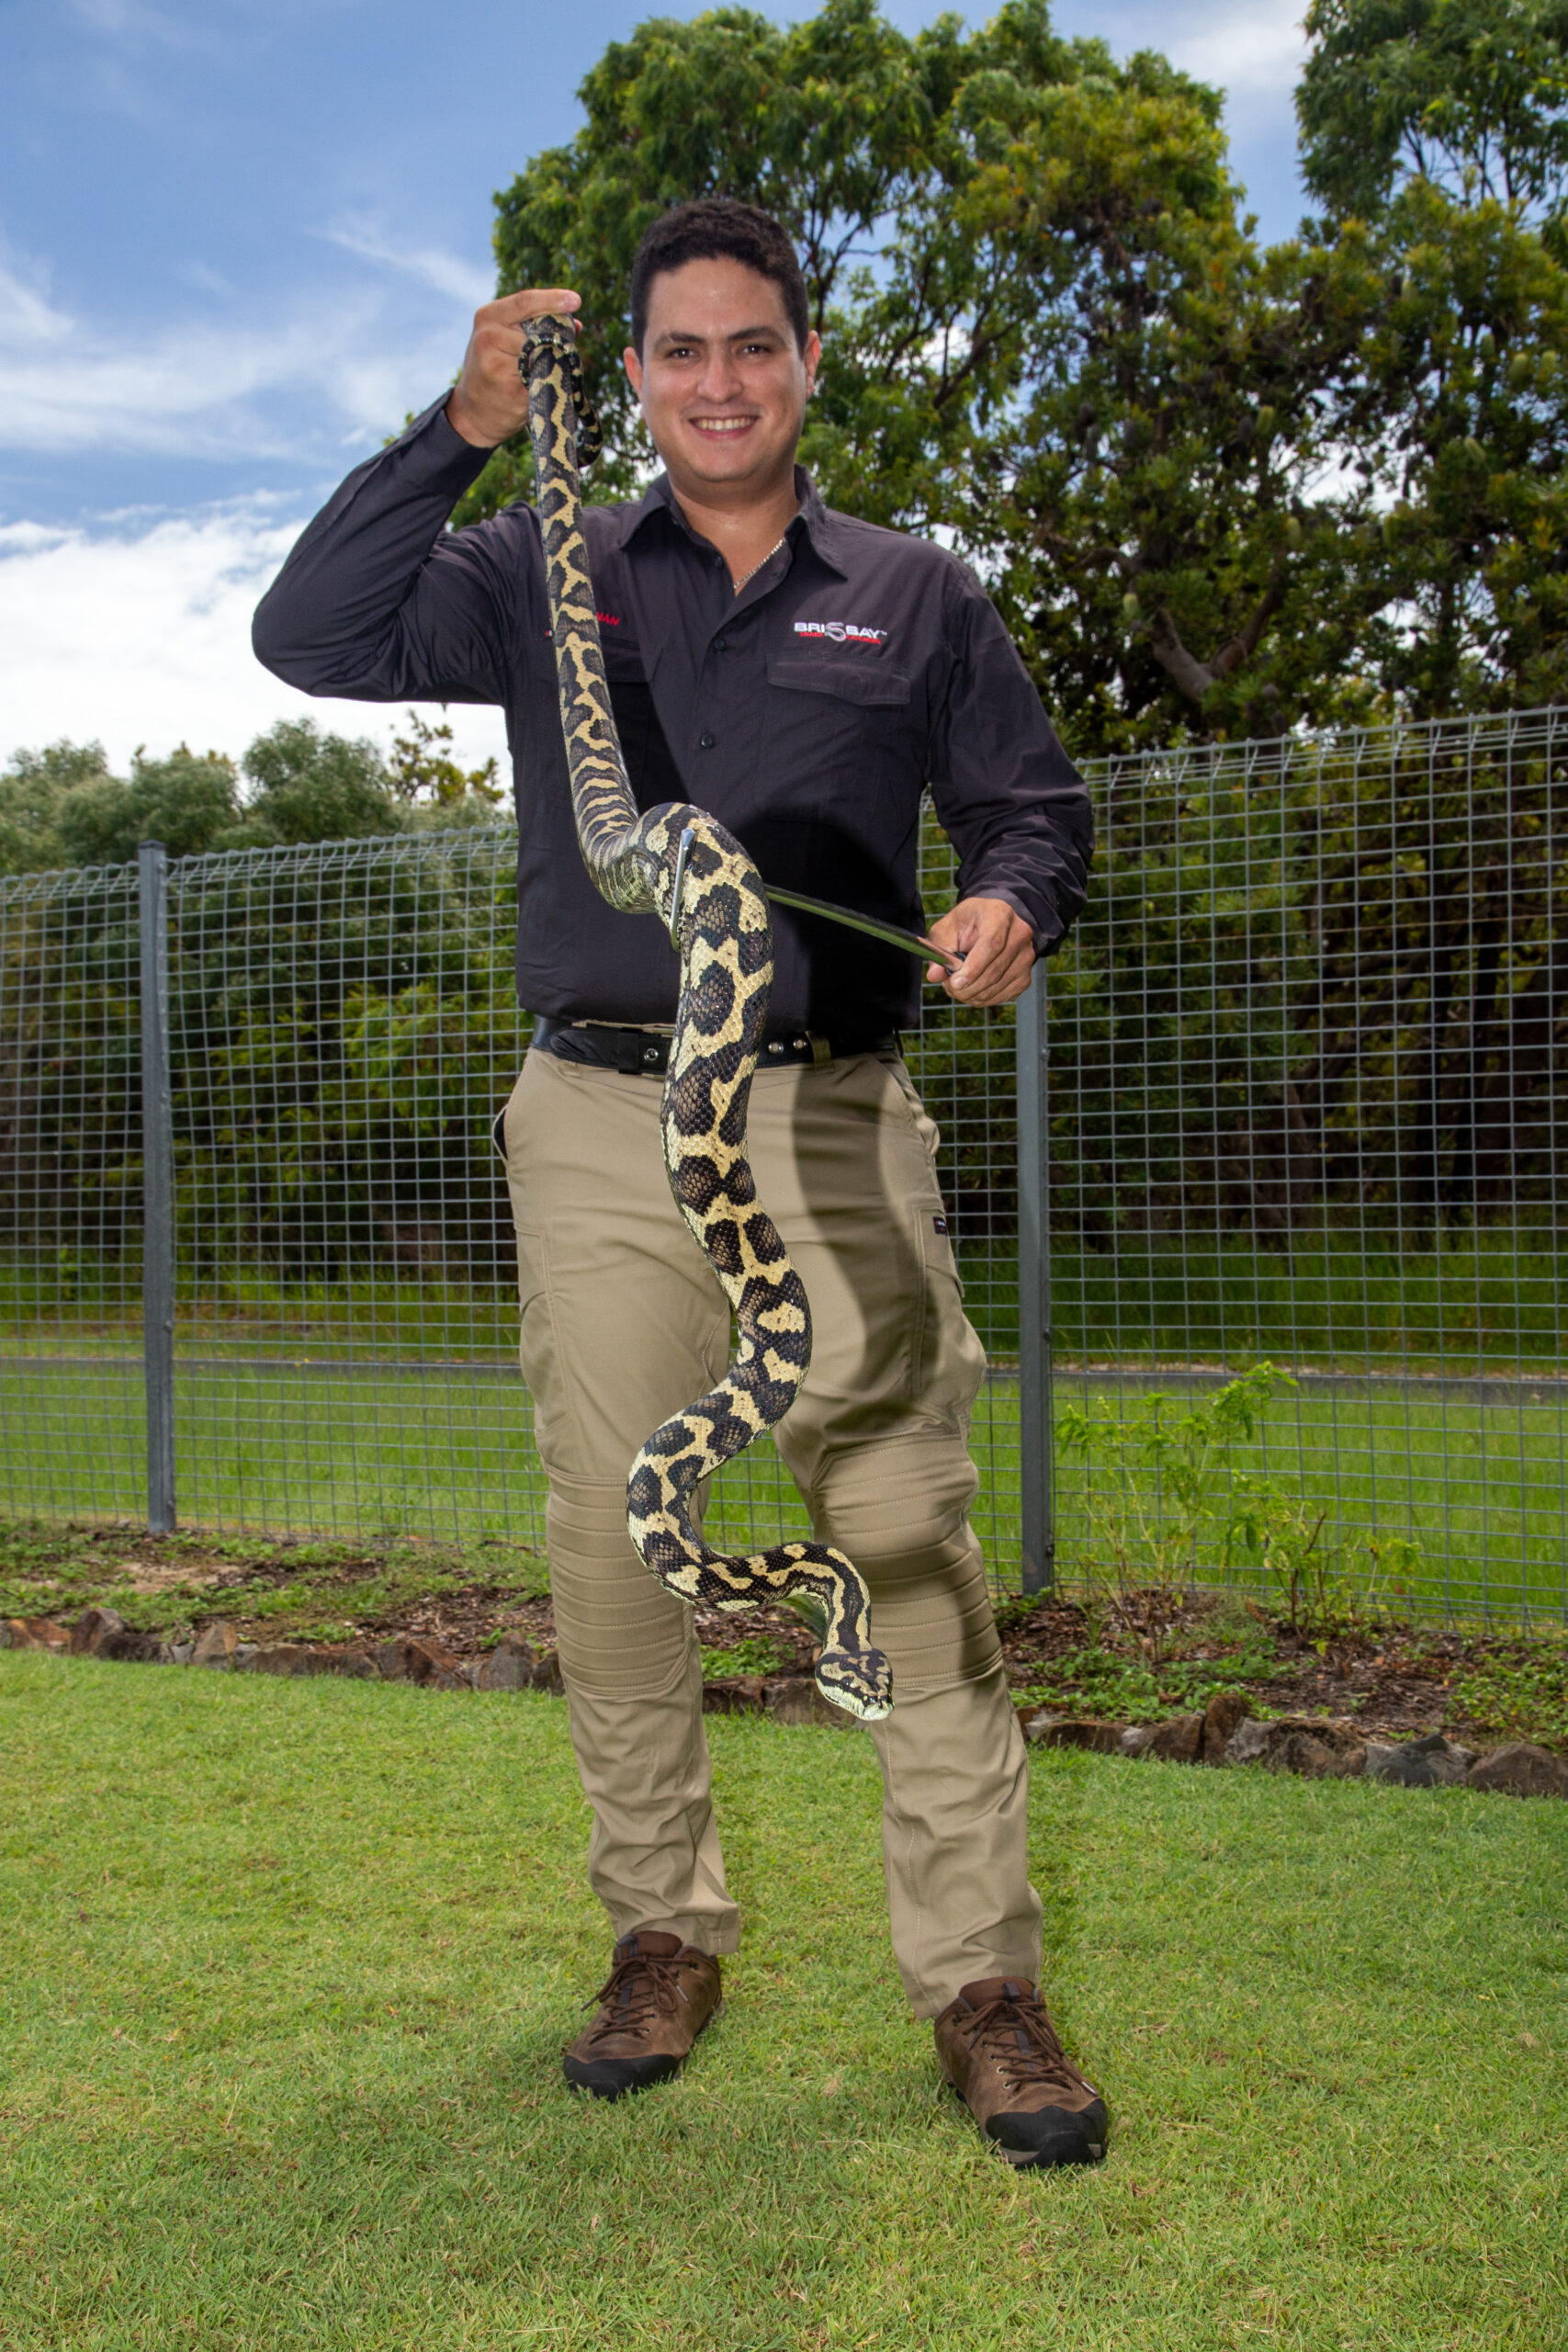 We are open for business – Brisbay Snakecatchers